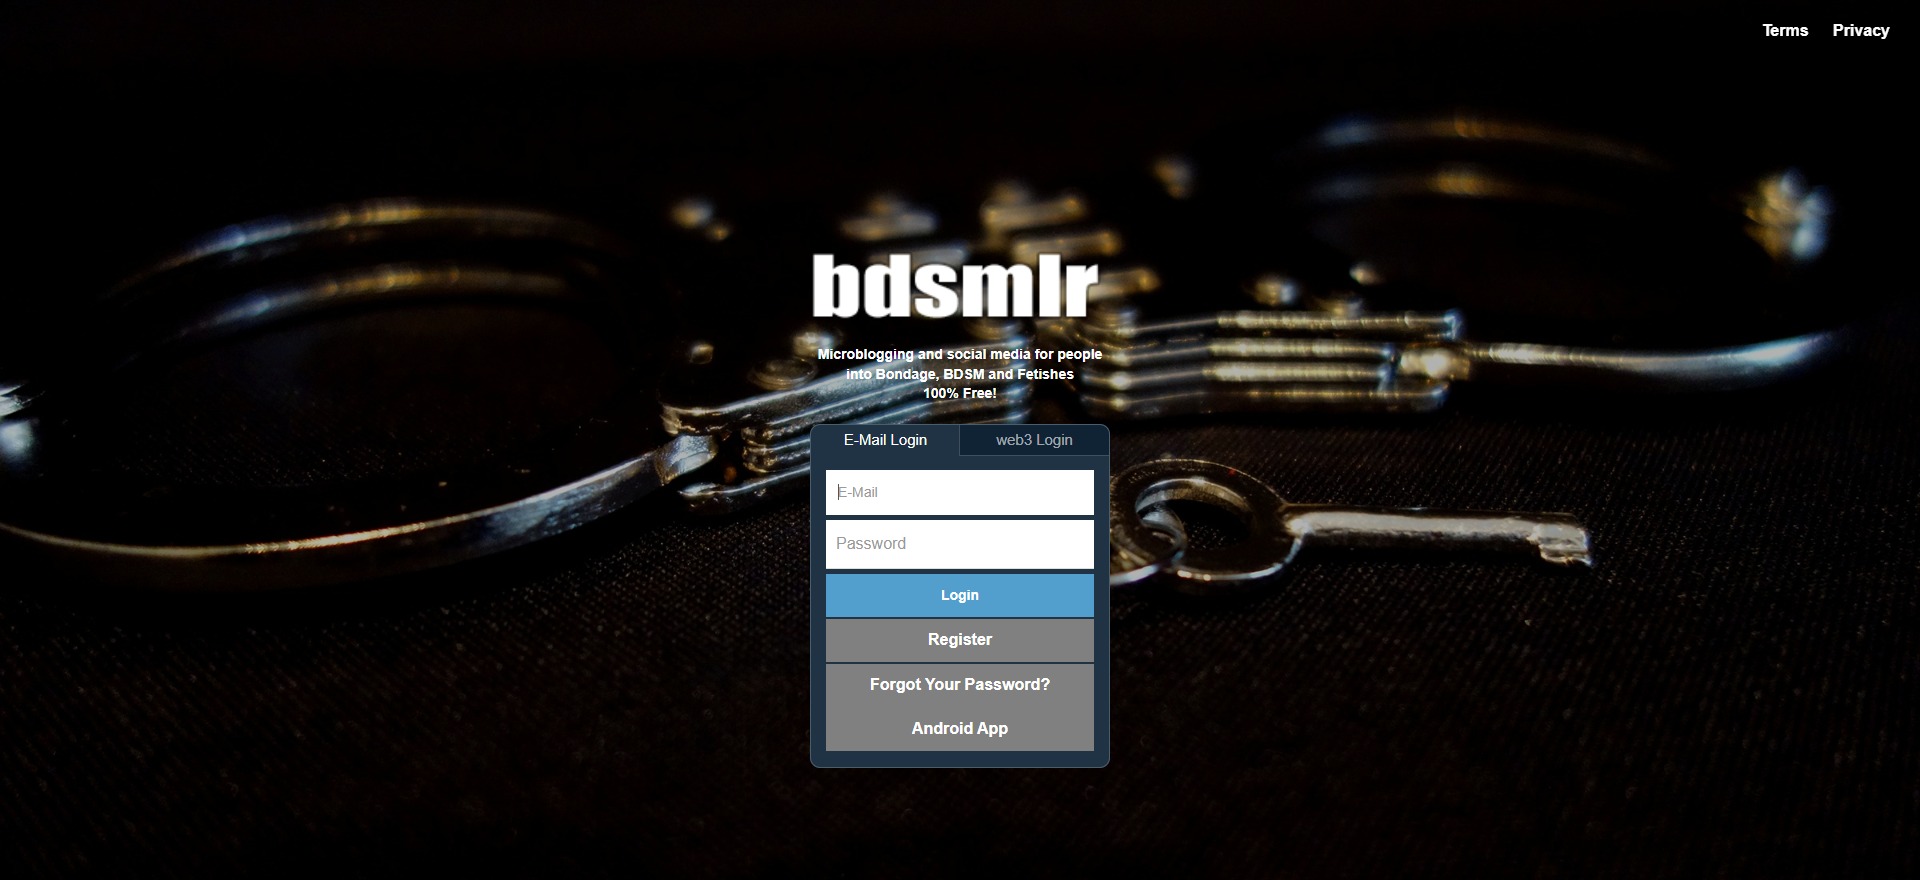 Bdsmlr: My opinion and all you need to know